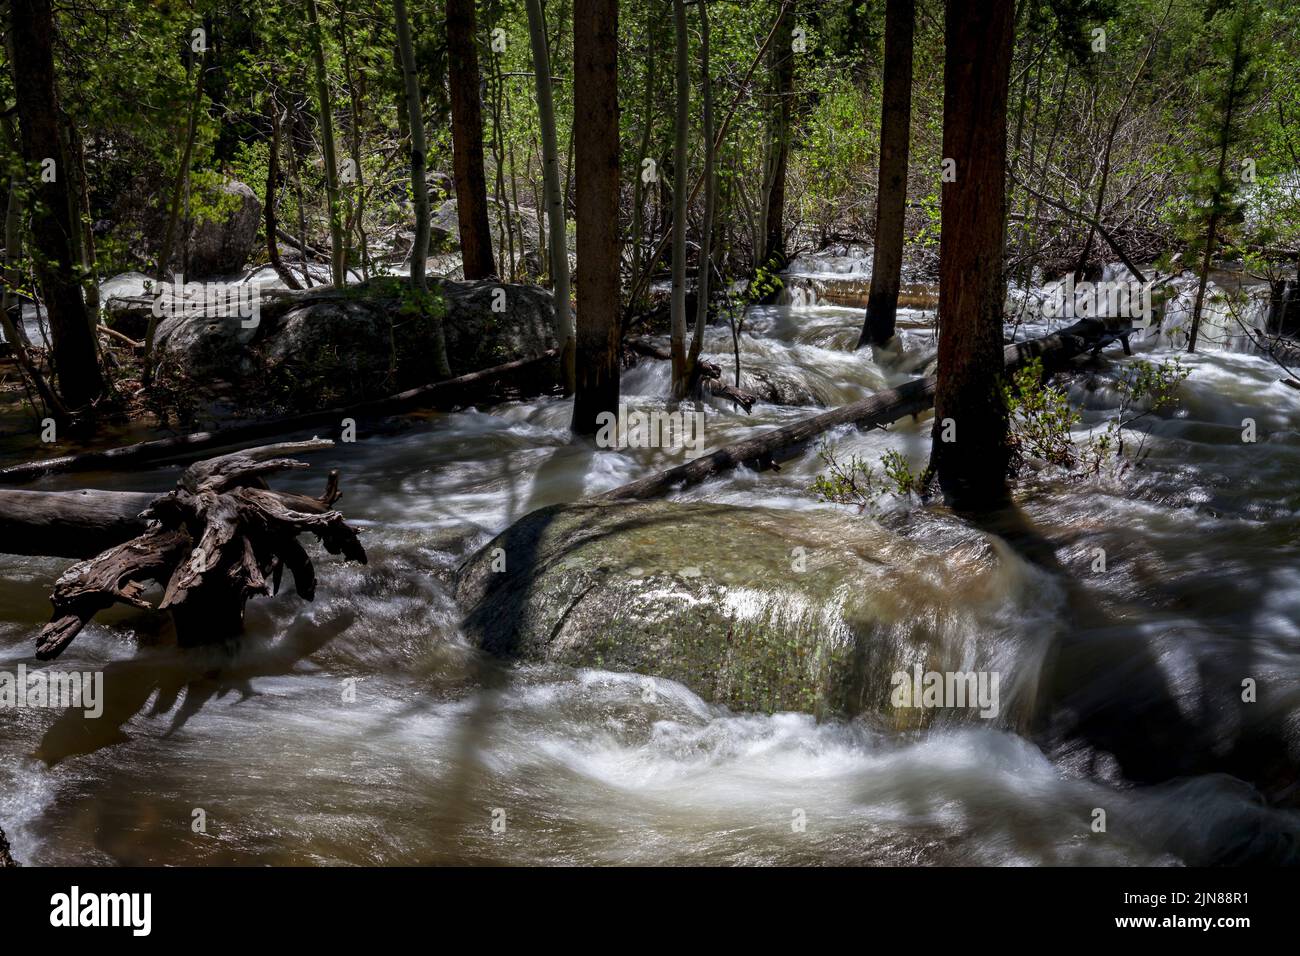 The Middle Popo Agie River overflows its banks and runs through the forest lining its banks at Sinks Canyon State Park near Lander, Wyoming. Stock Photo